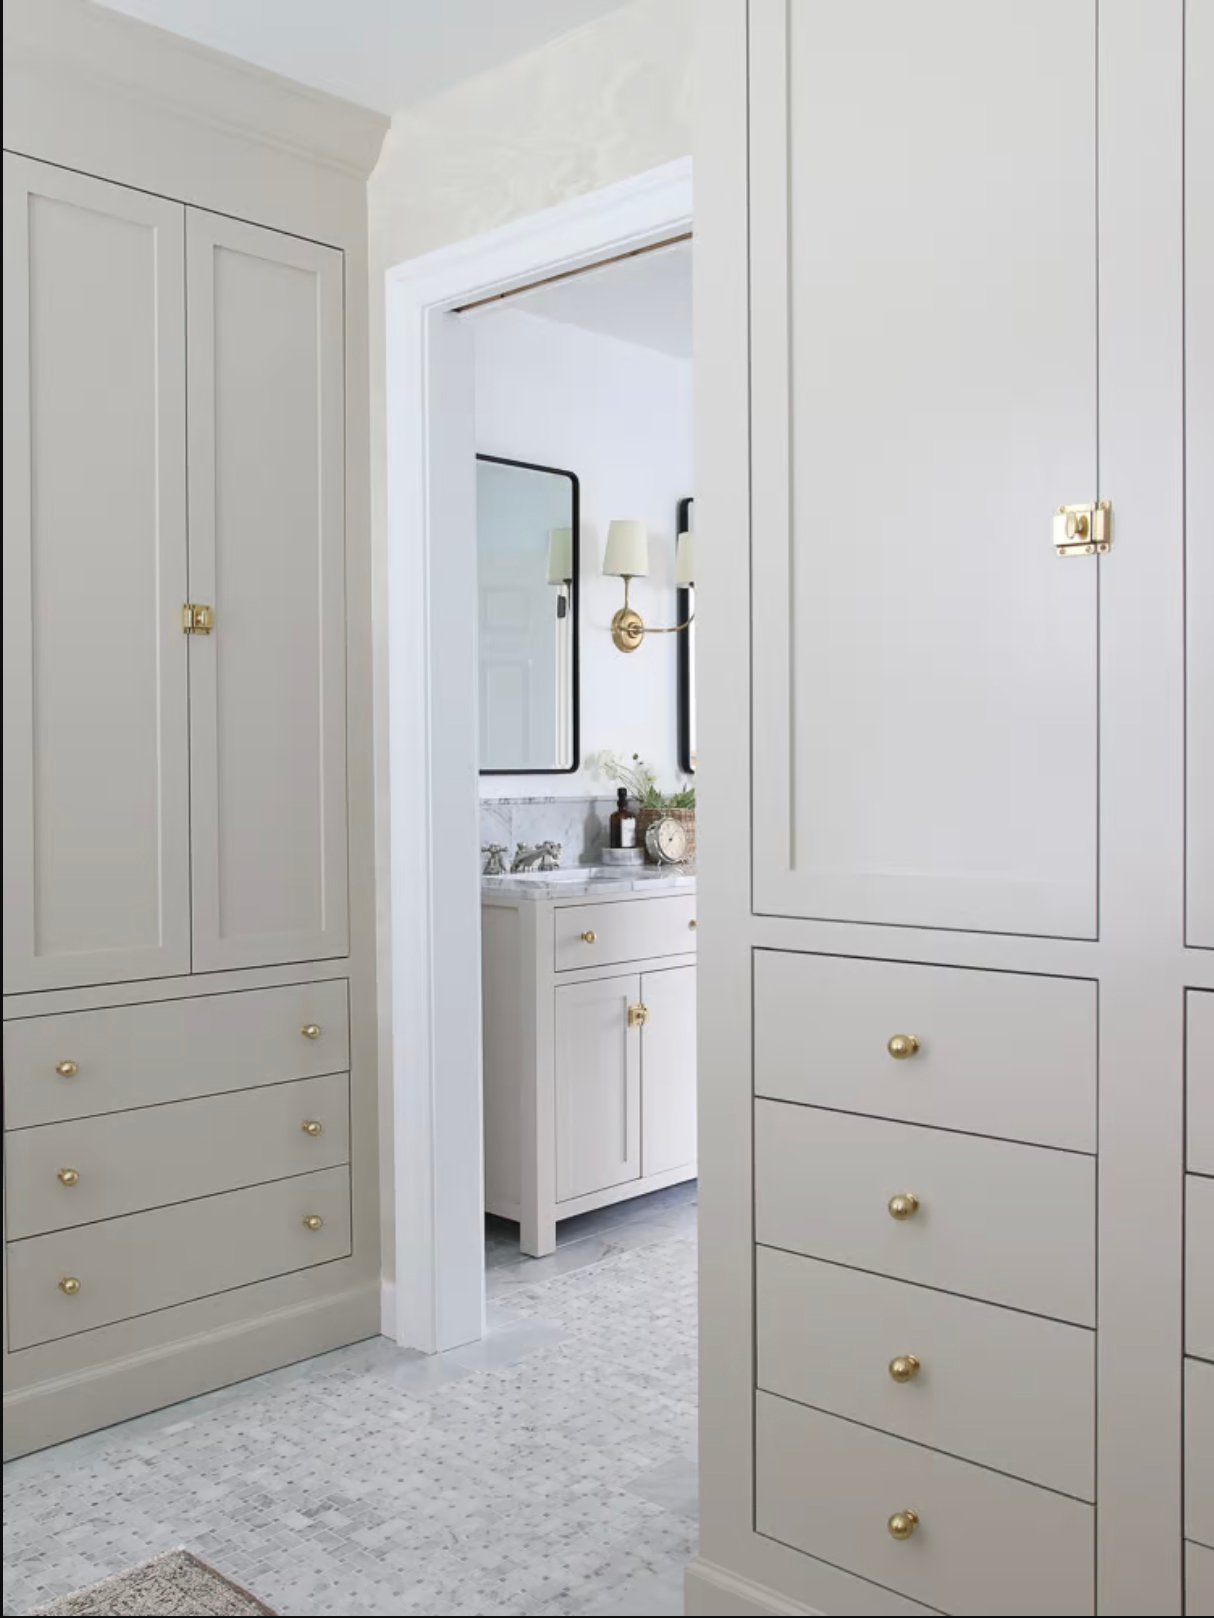 built-in cabinets painted Accessible Beige with a view to a bathroom